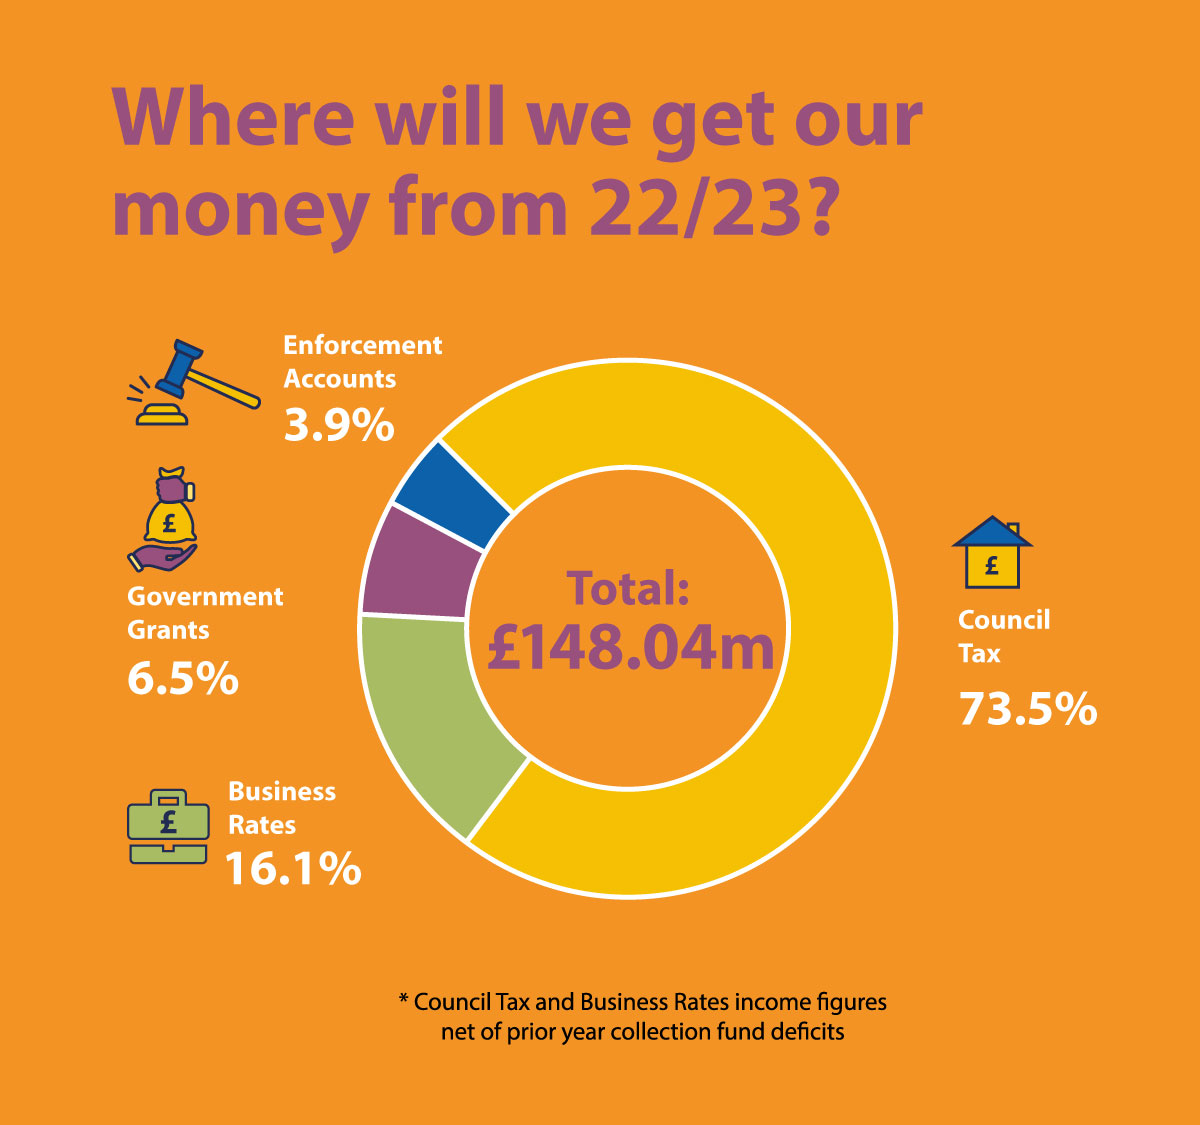 Where will we get our money from 22/23?